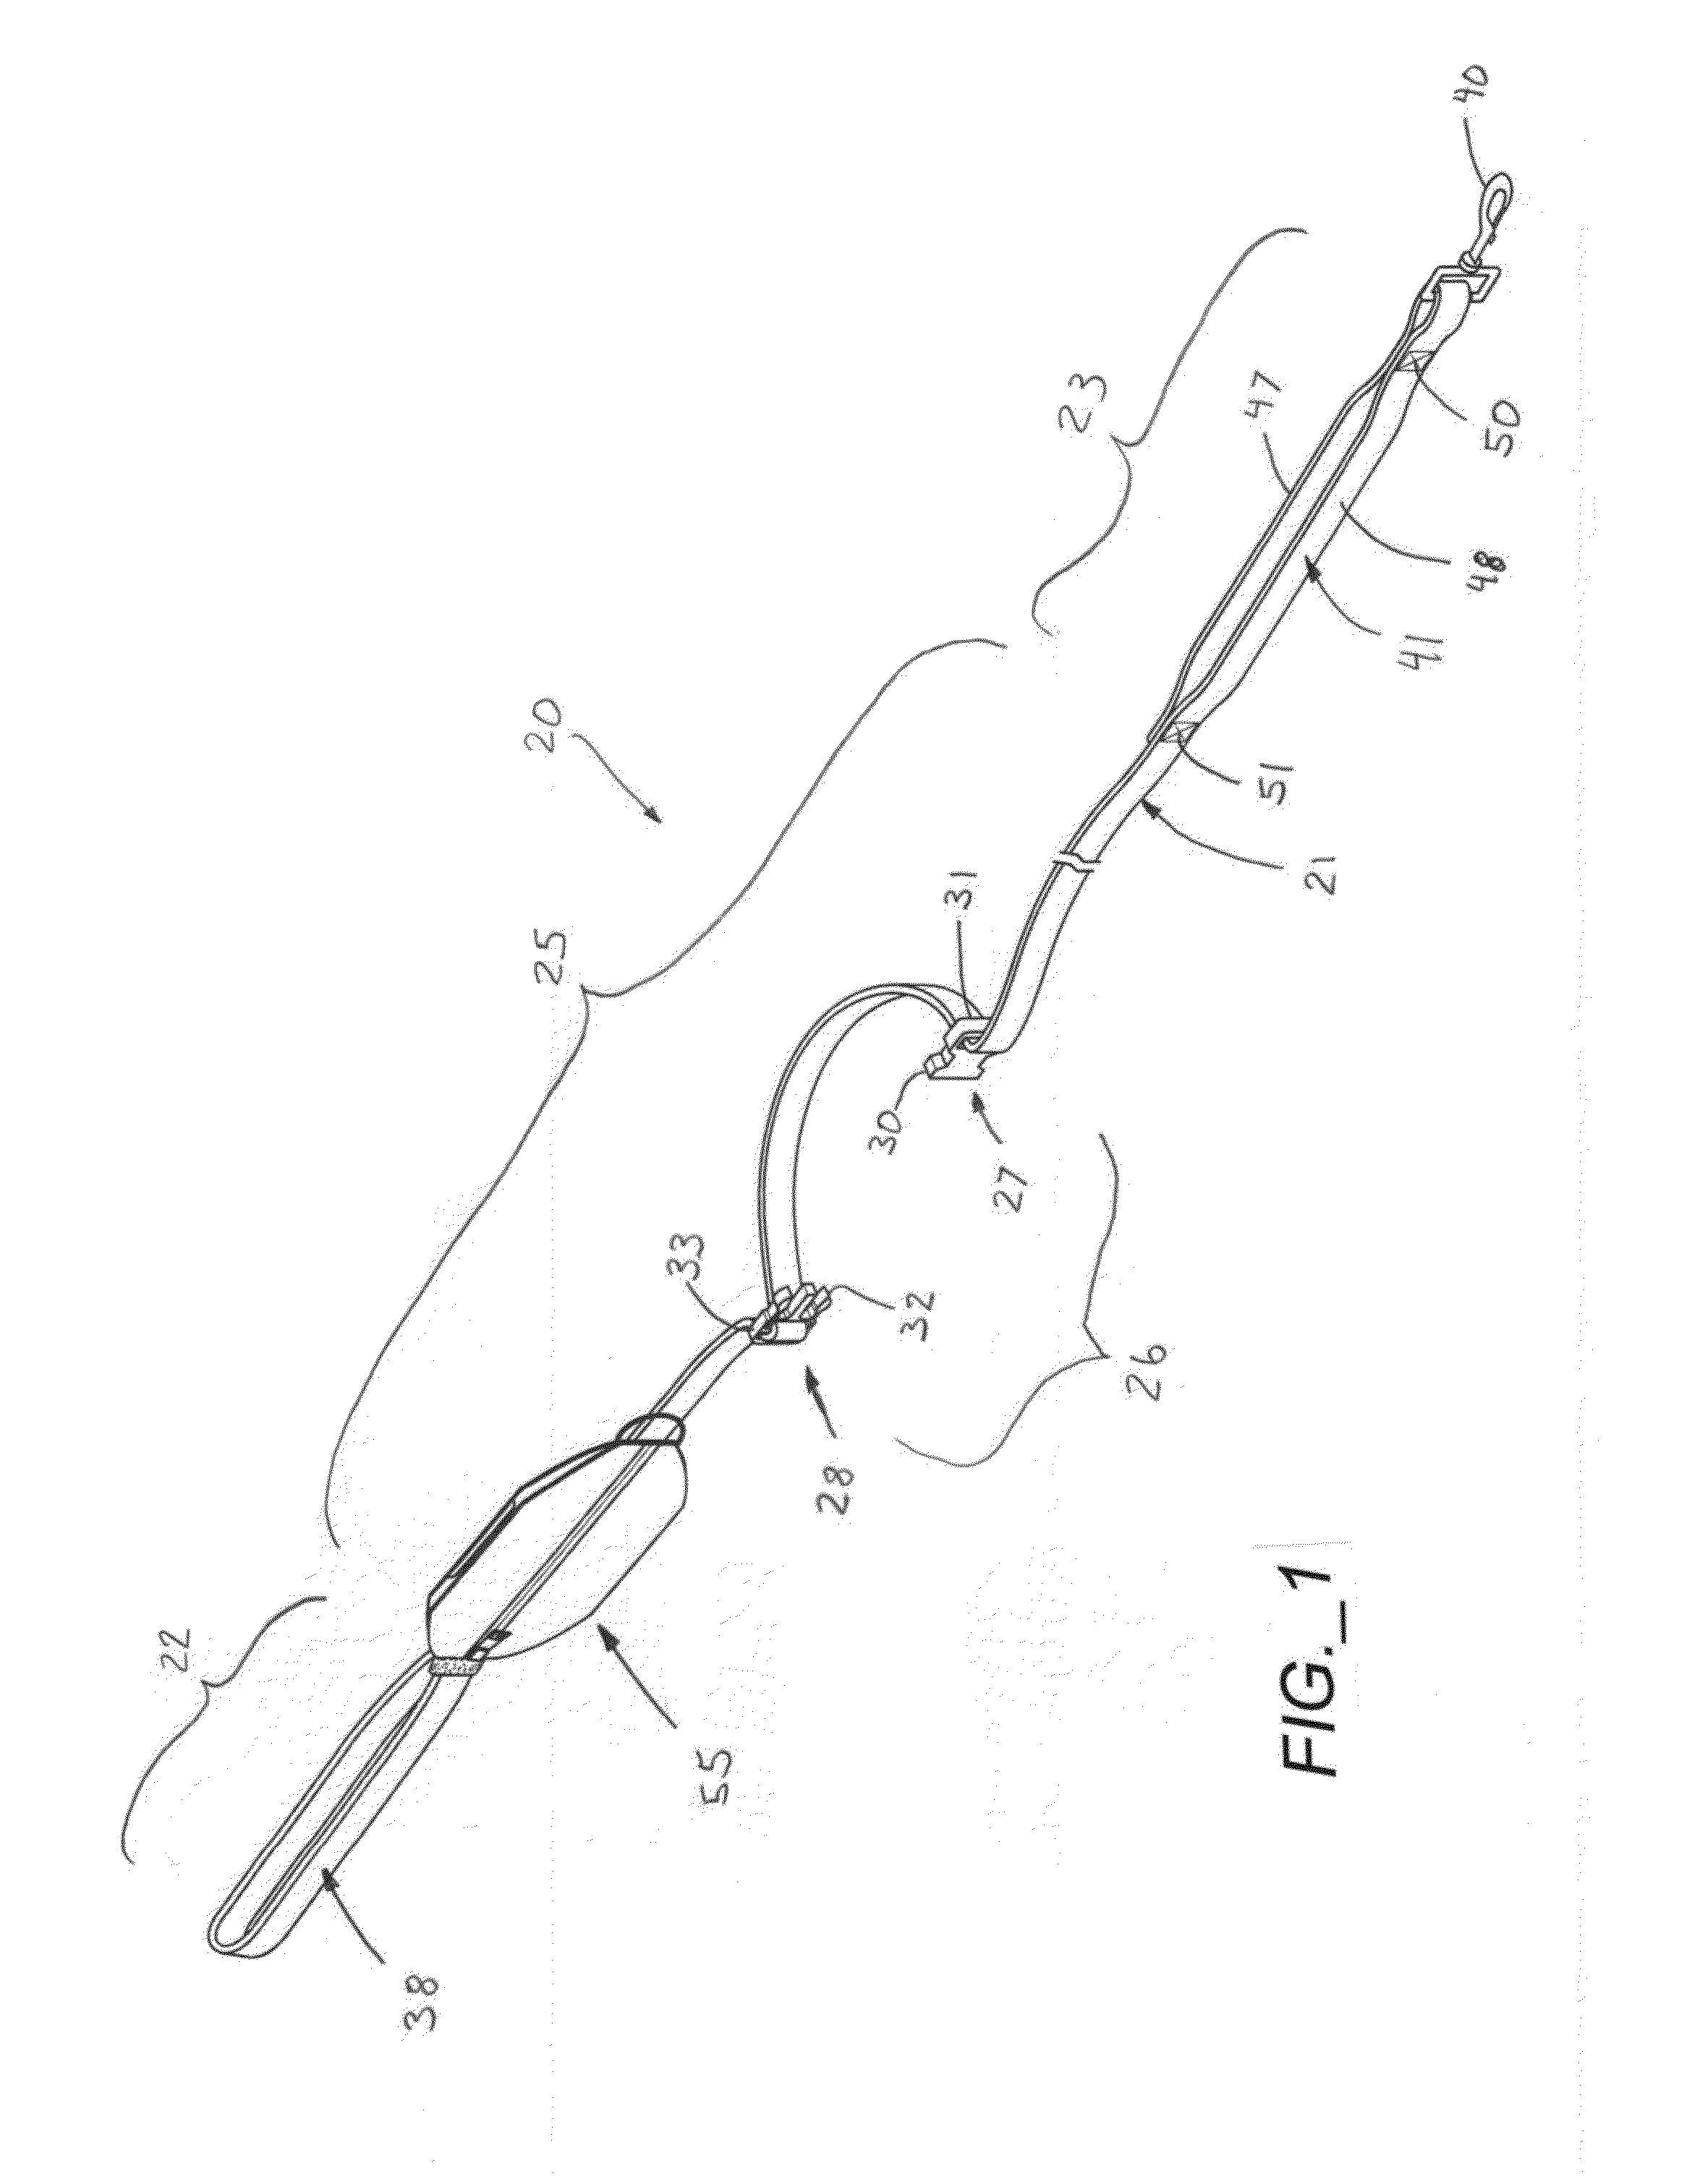 Leash assembly with quick release apparatus